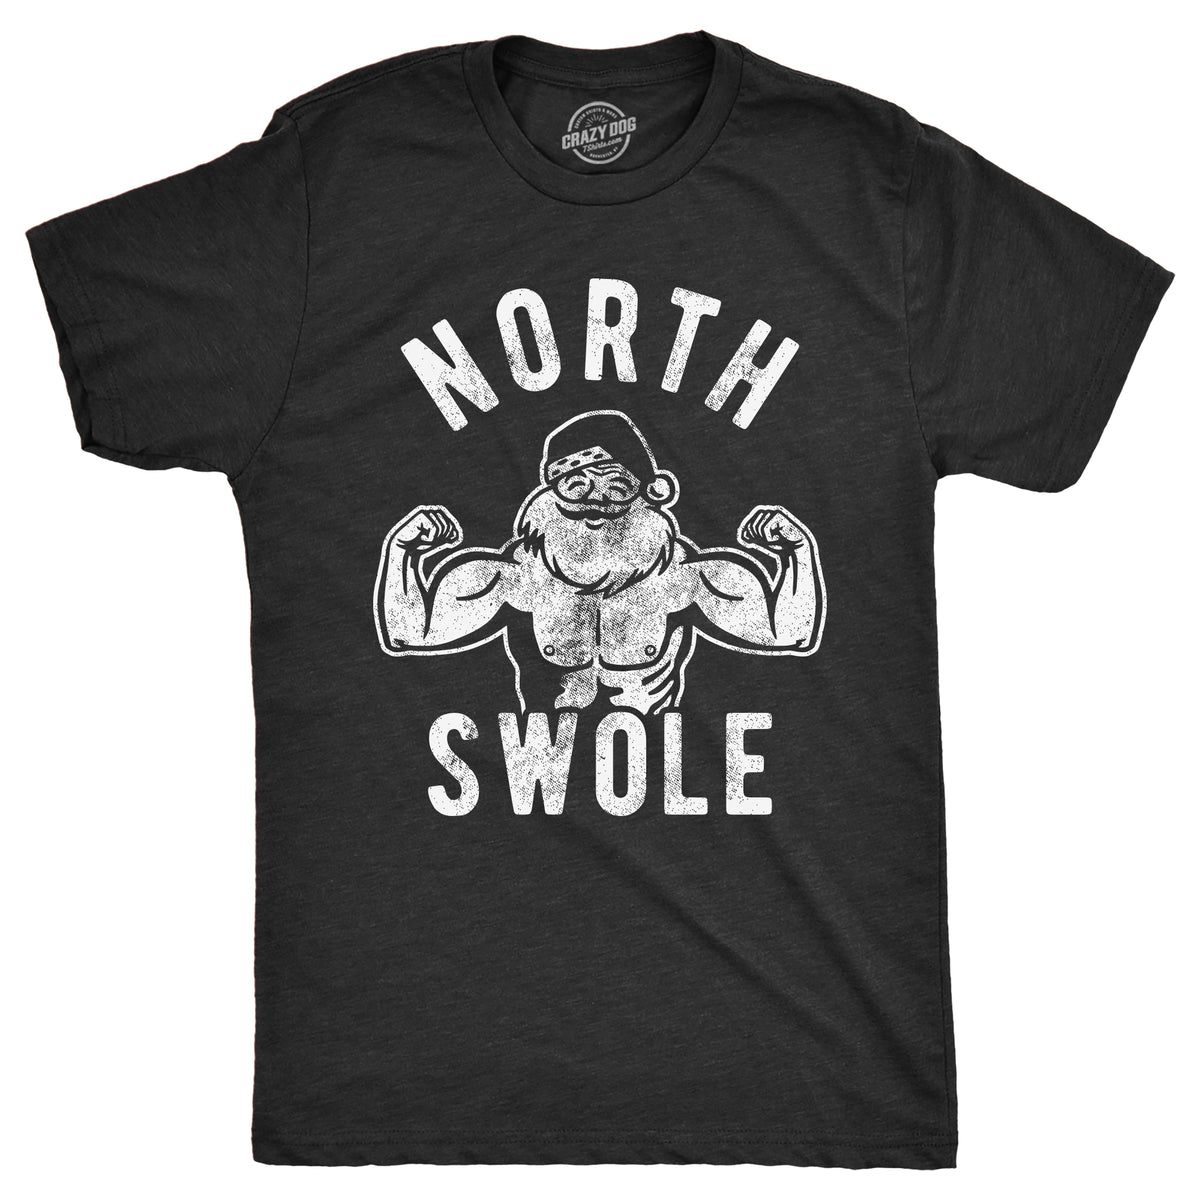 Funny Heather Black - North Swole North Swole Mens T Shirt Nerdy Christmas Fitness Tee